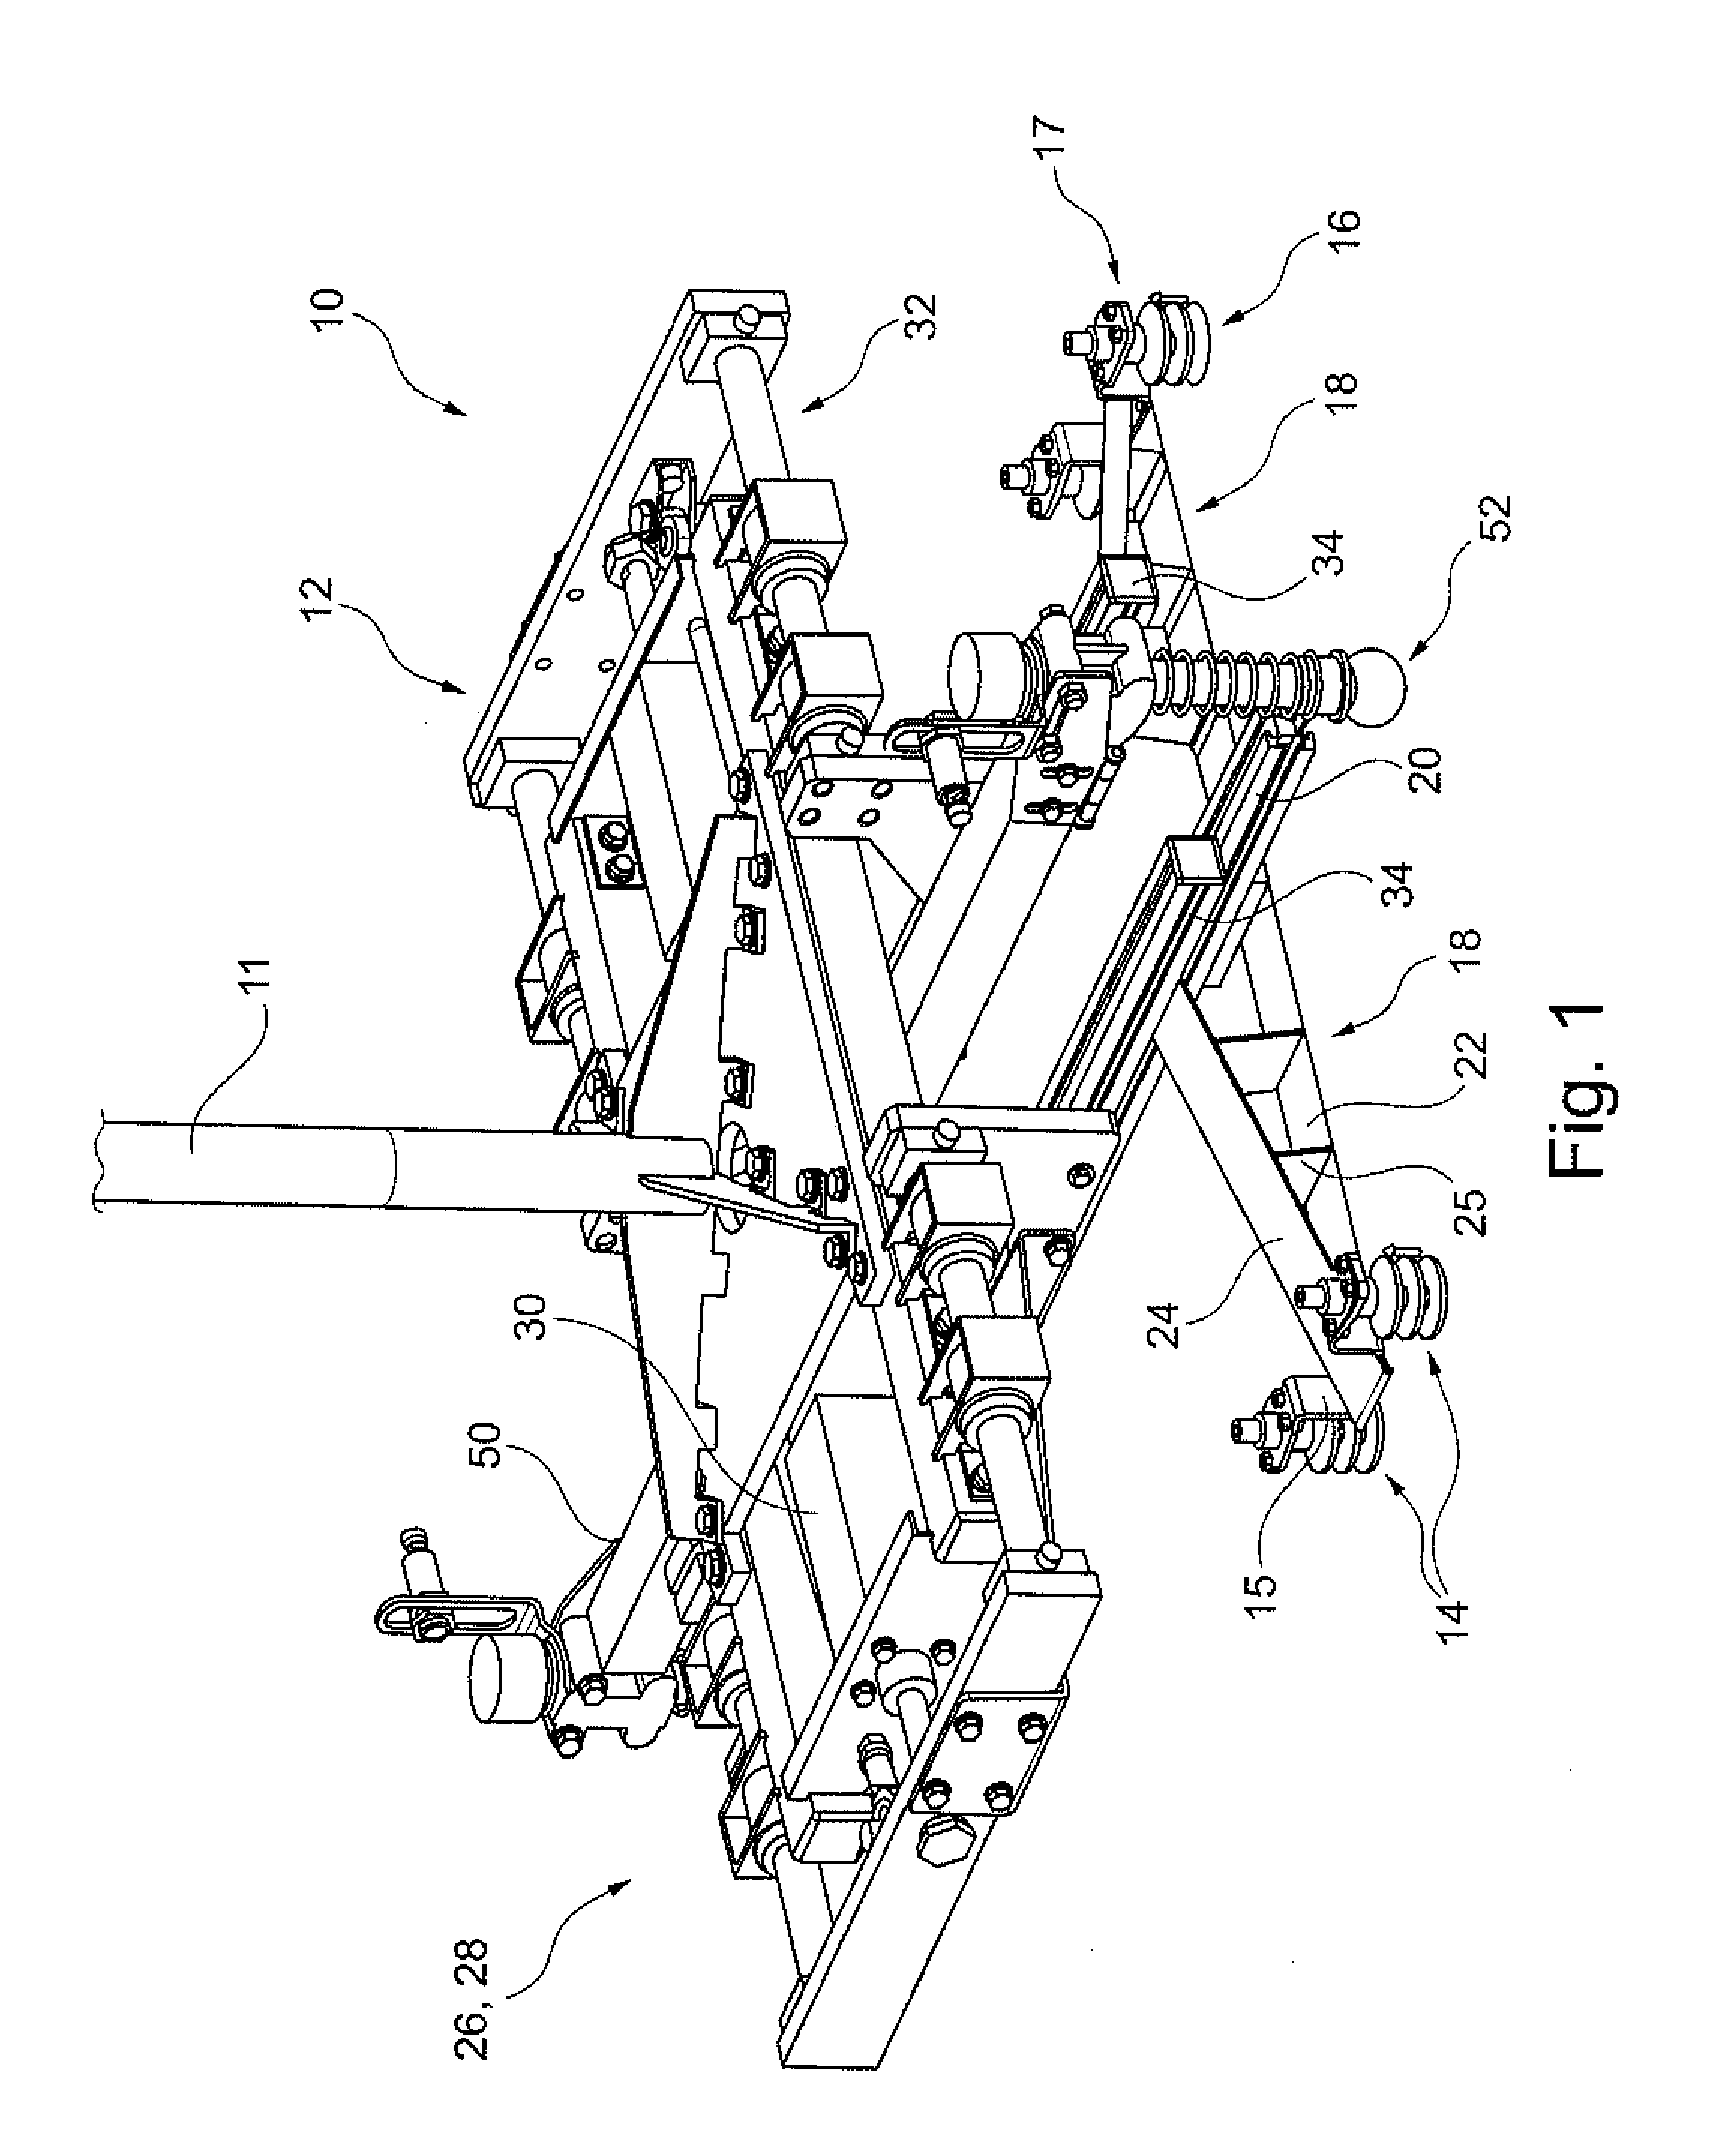 Device and method for receiving, holding and/or handling two-dimensional objects